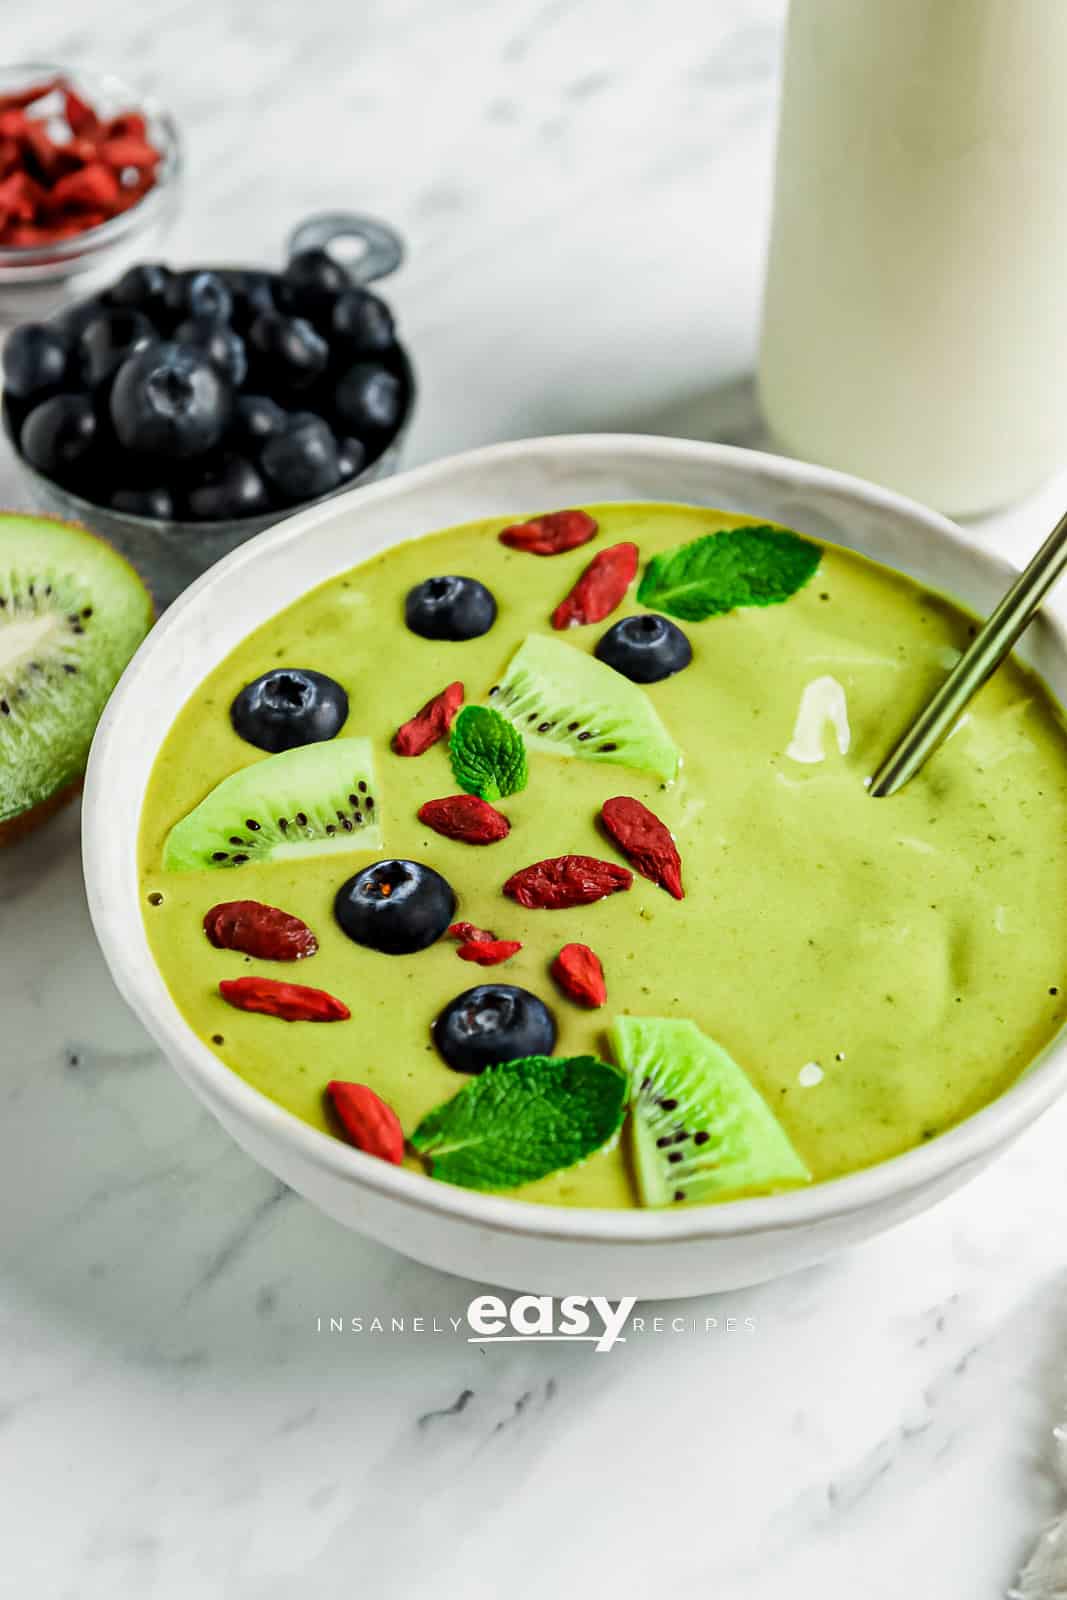 photo of a Matcha Bowl with sliced kiwis, goji berries, blueberries, and mint leaves on top. There is a gold spoon in the bowl and blueberries, half a kiwi, goji berries, and a jar of coconut milk in the background